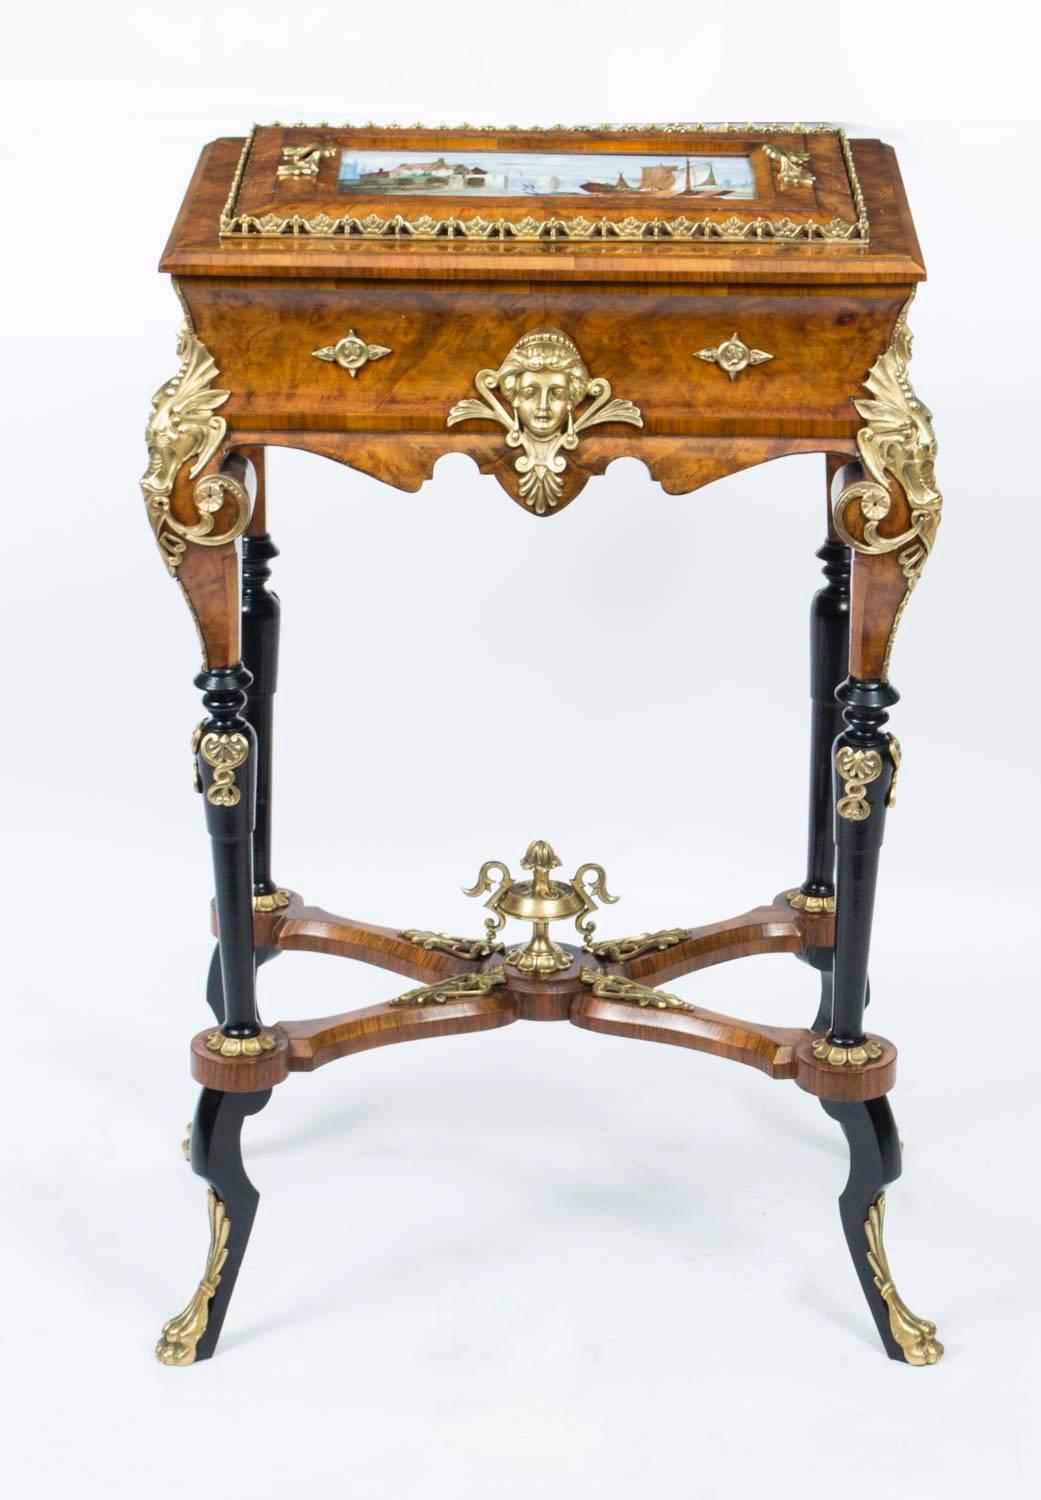 This is a superb antique Napoleon III porcelain and gilt ormolu mounted burr walnut and ebonised jardiniere after Charles Guillaume Diehl. 

The twin handled lid is inset with a beautiful hand painted Sevres style porcelain plaque decorated with